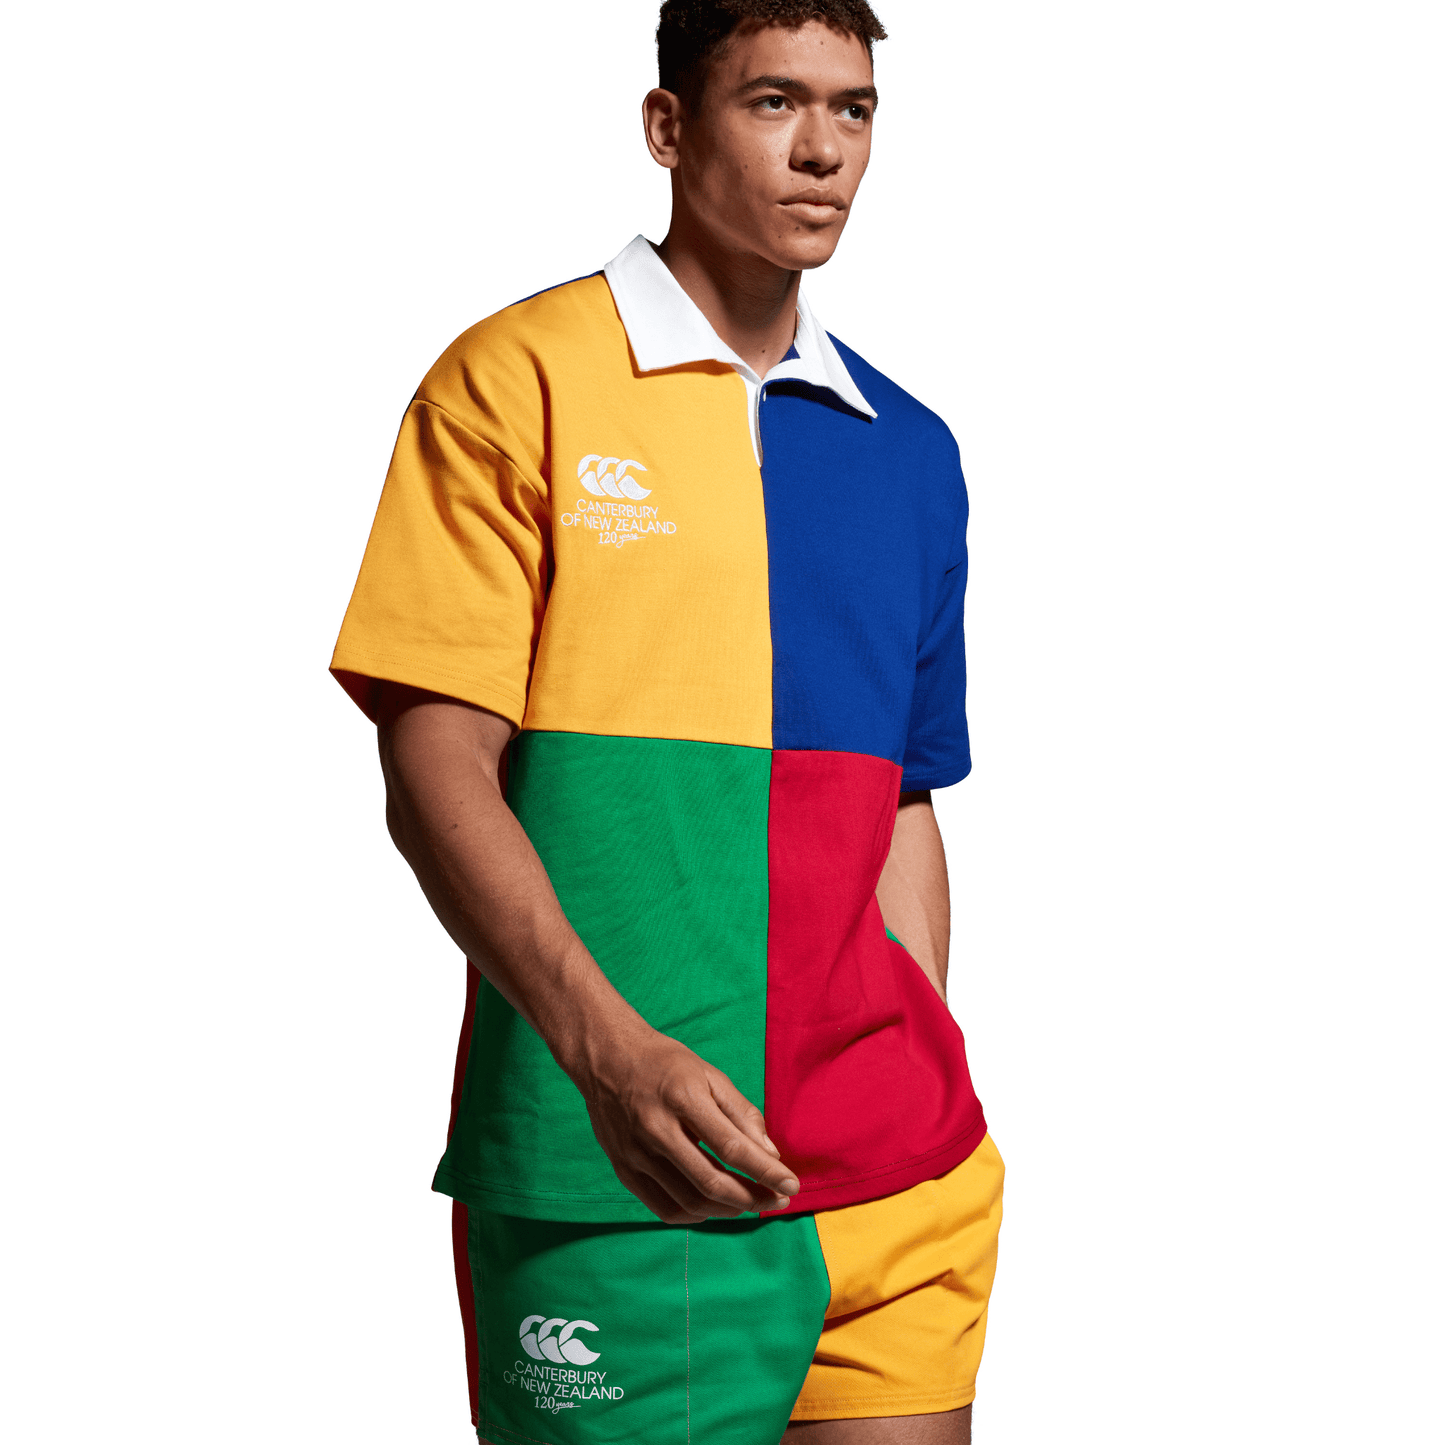 Limited-Edition Four Coloured Canterbury Rugby Jersey and Harlequin Shorts. A part of the new 120 Years of Canterbury clothing range.